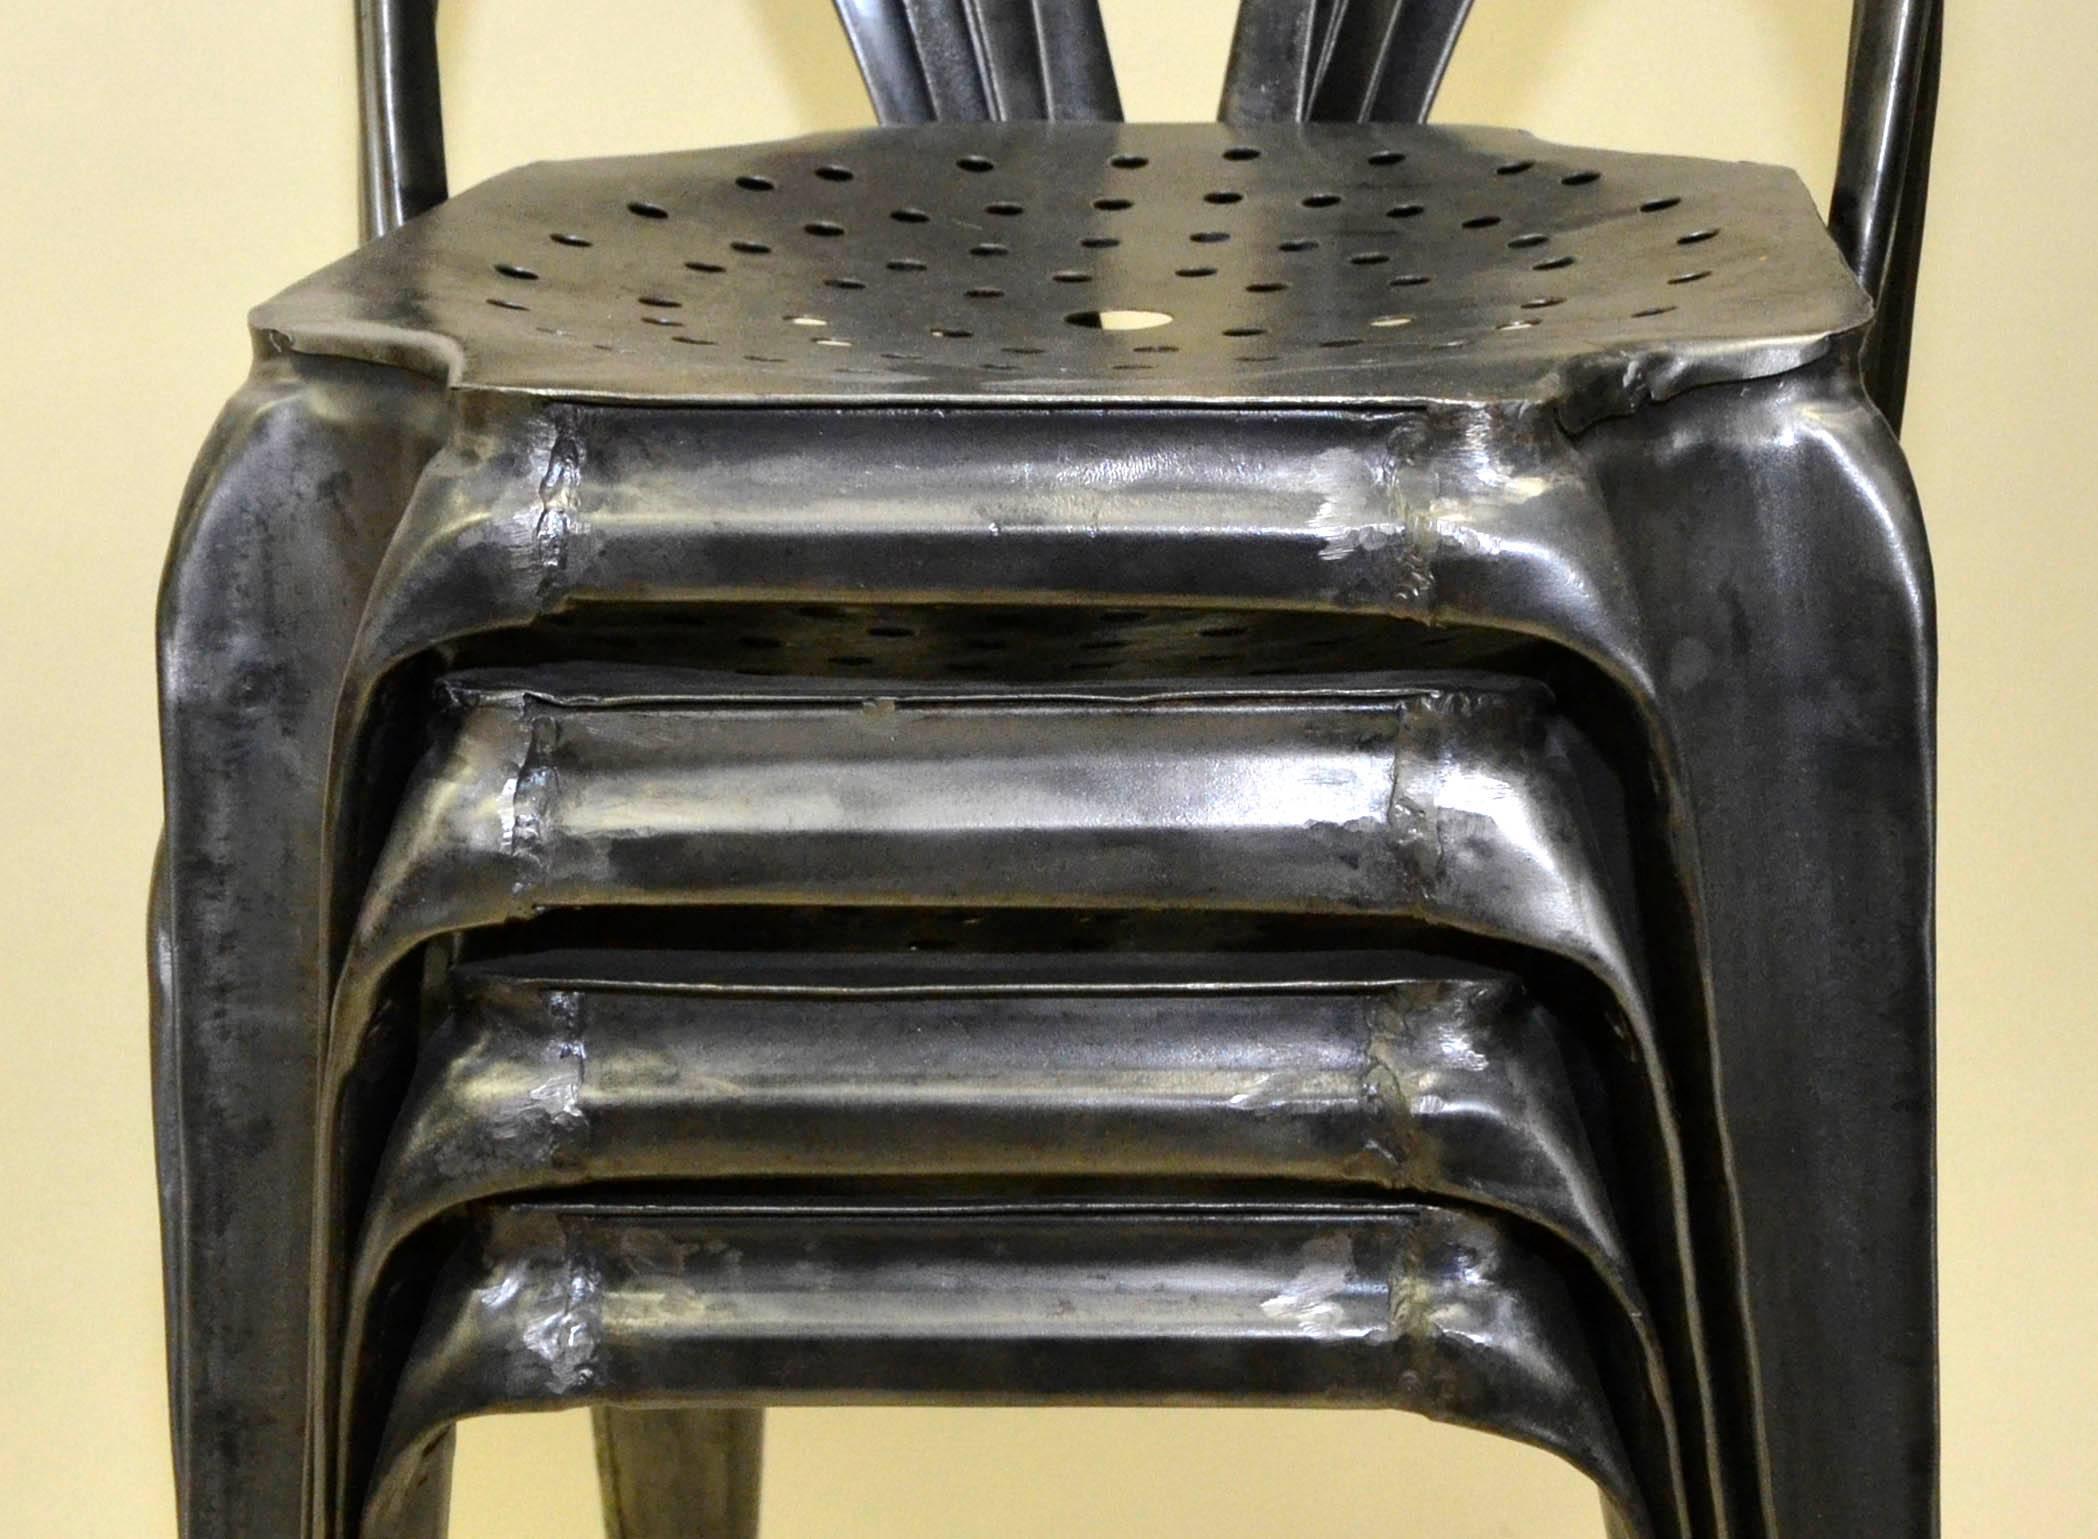 This French style bistro chair was manufactured by Multiples in Lyon and designed by Joseph Mathieu for the first time in 1922.
This Industrial style stripped metal stacking chair was an extraordinarily popular choice among restaurants, cafes in